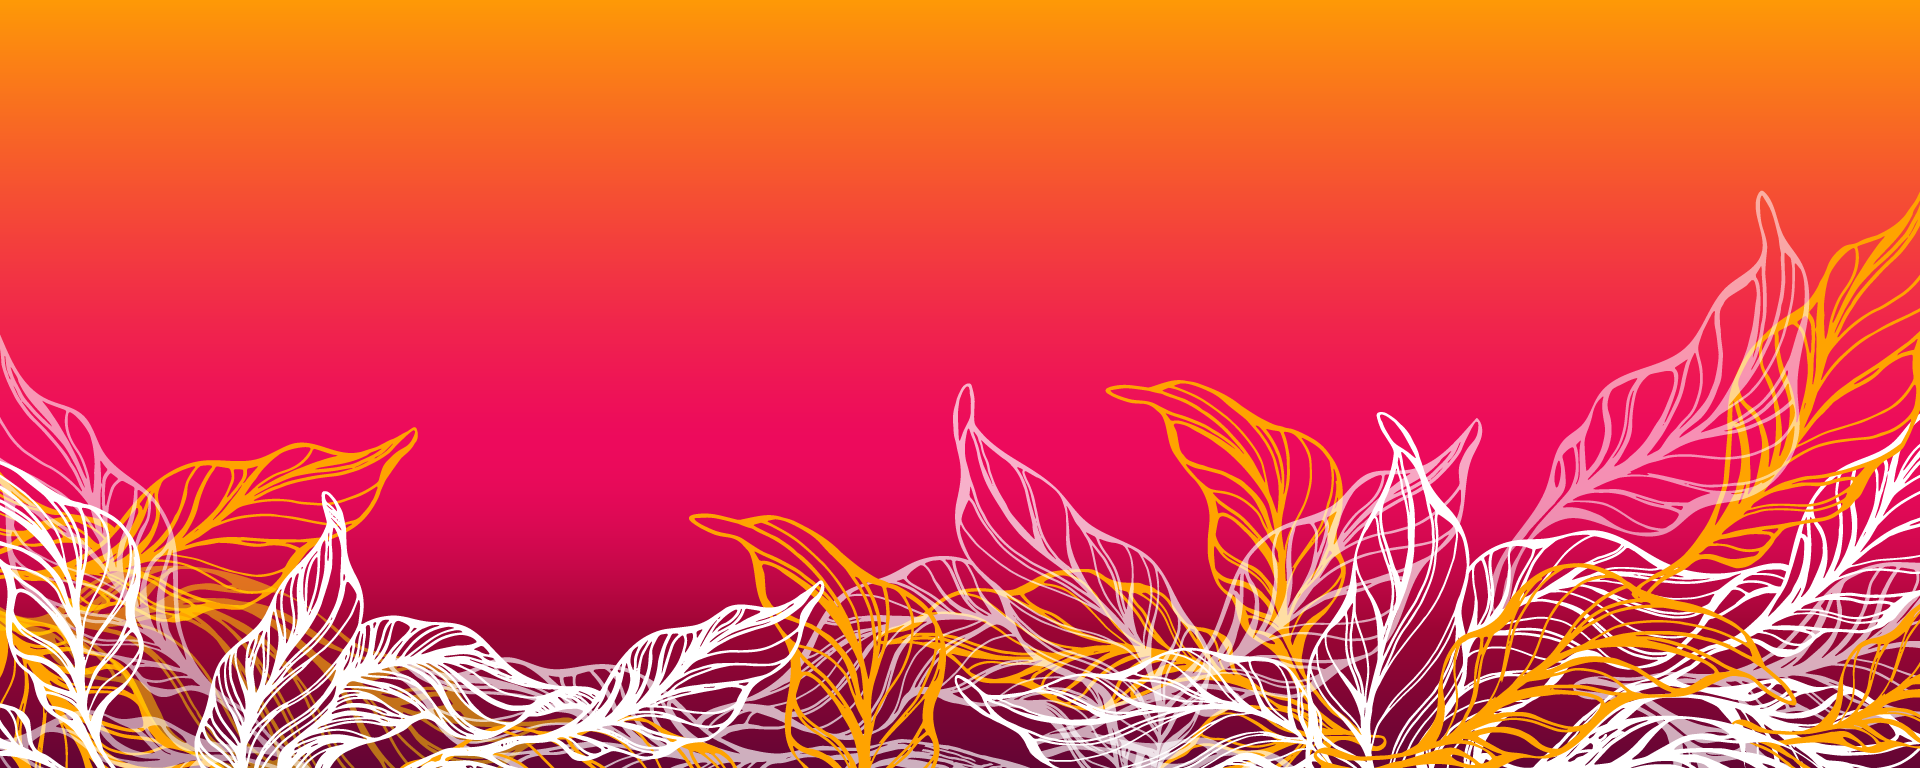 Orange, pink and red background with gold and white leaves on top.